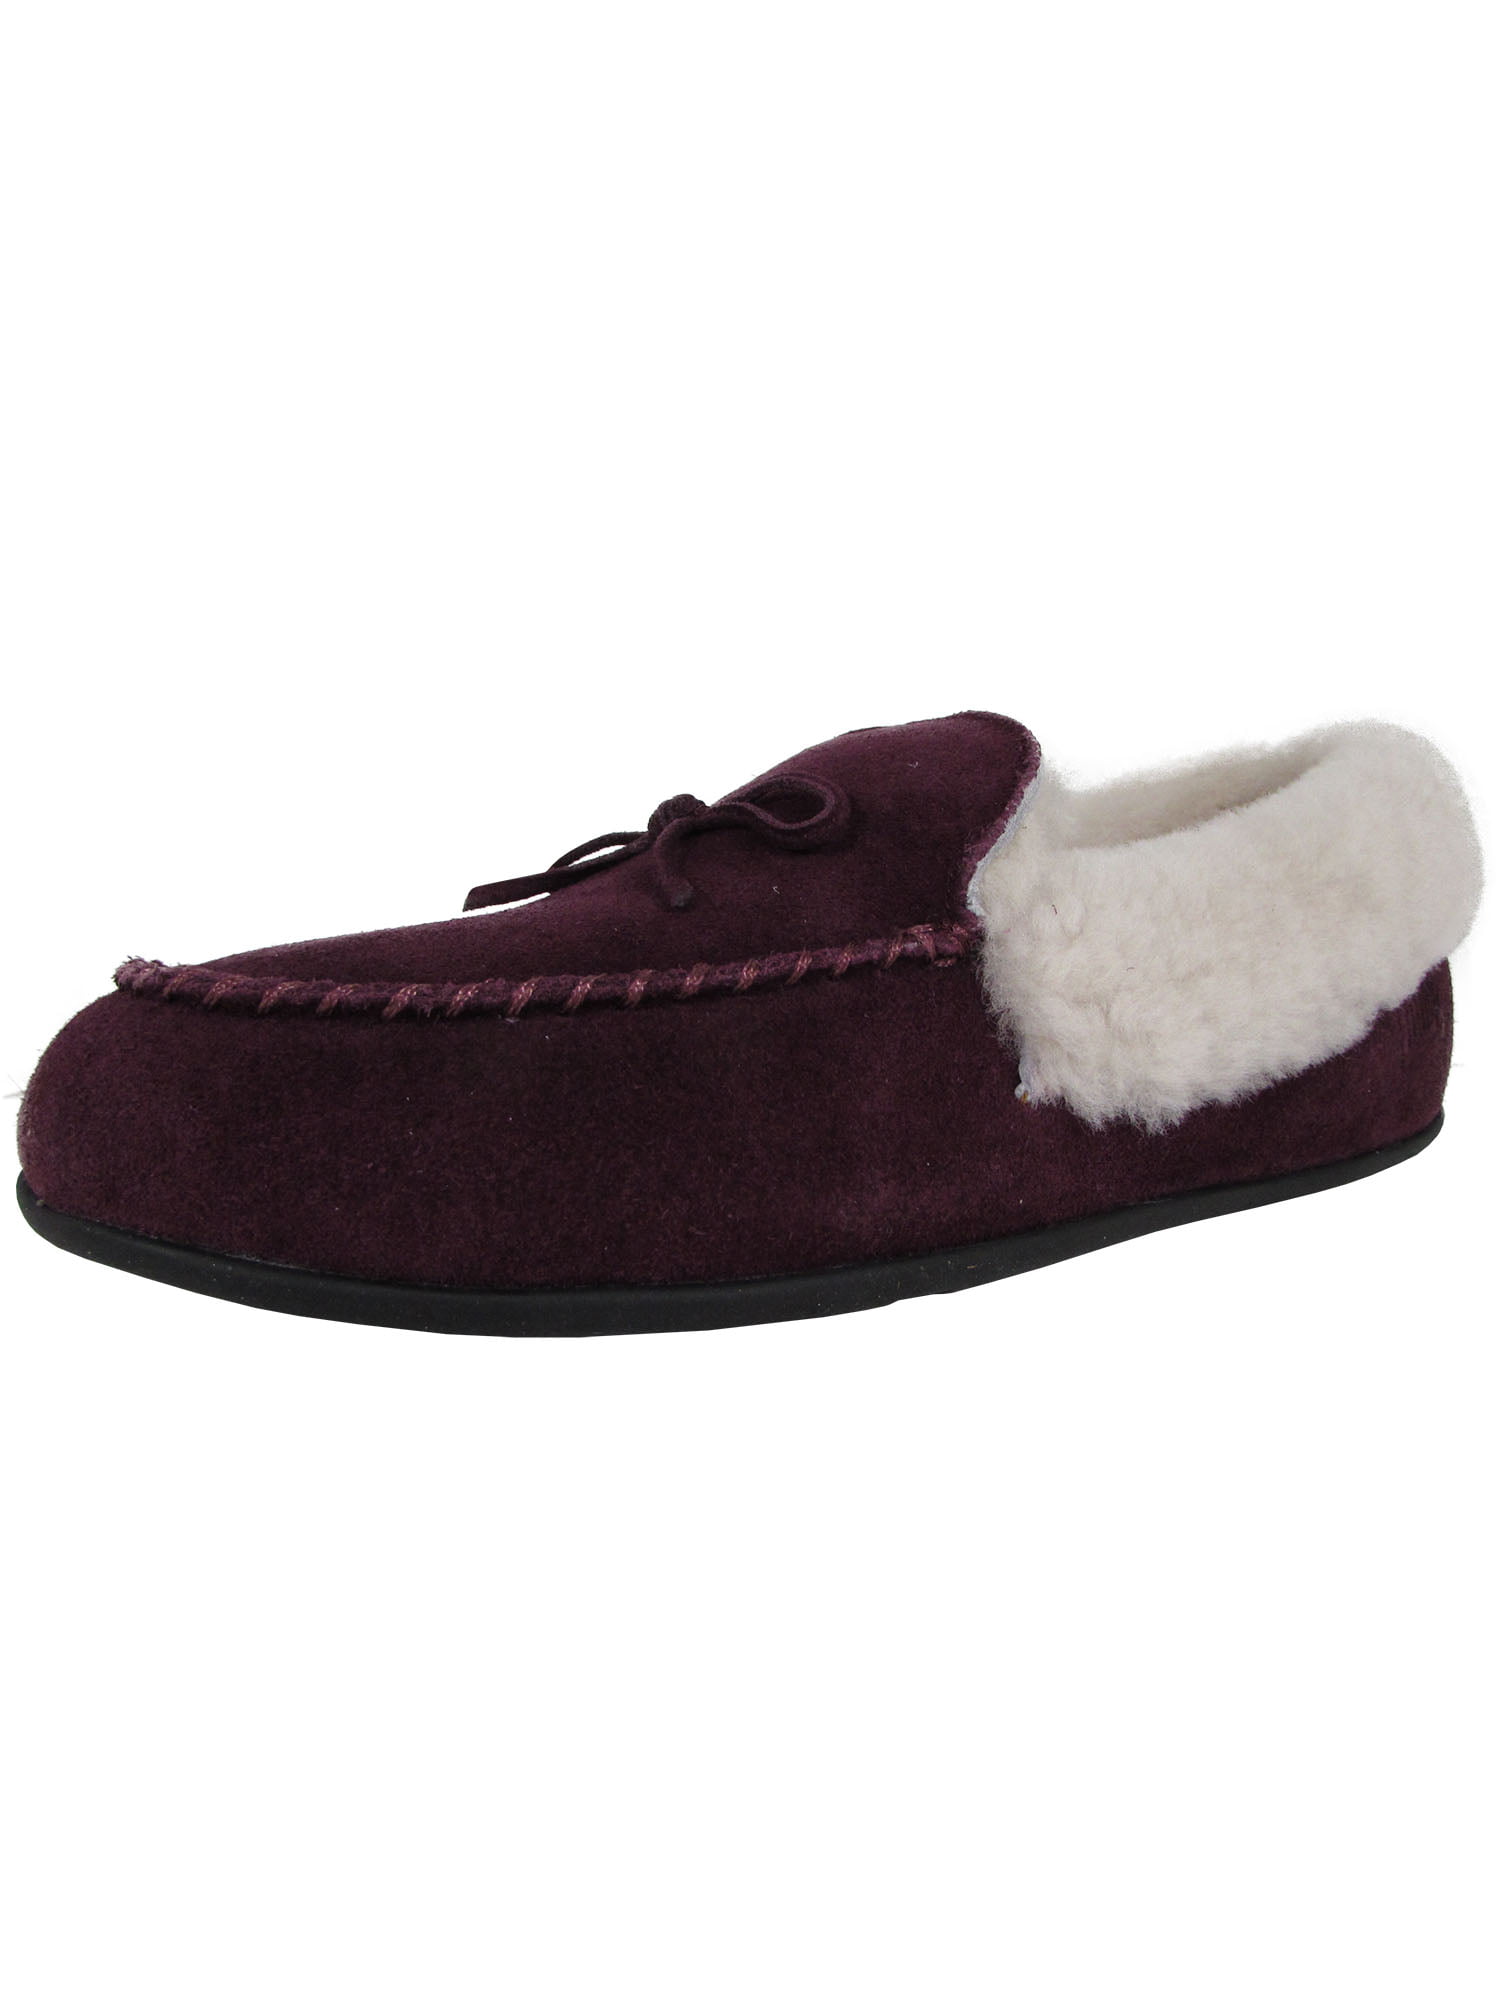 suede moccasin slippers womens